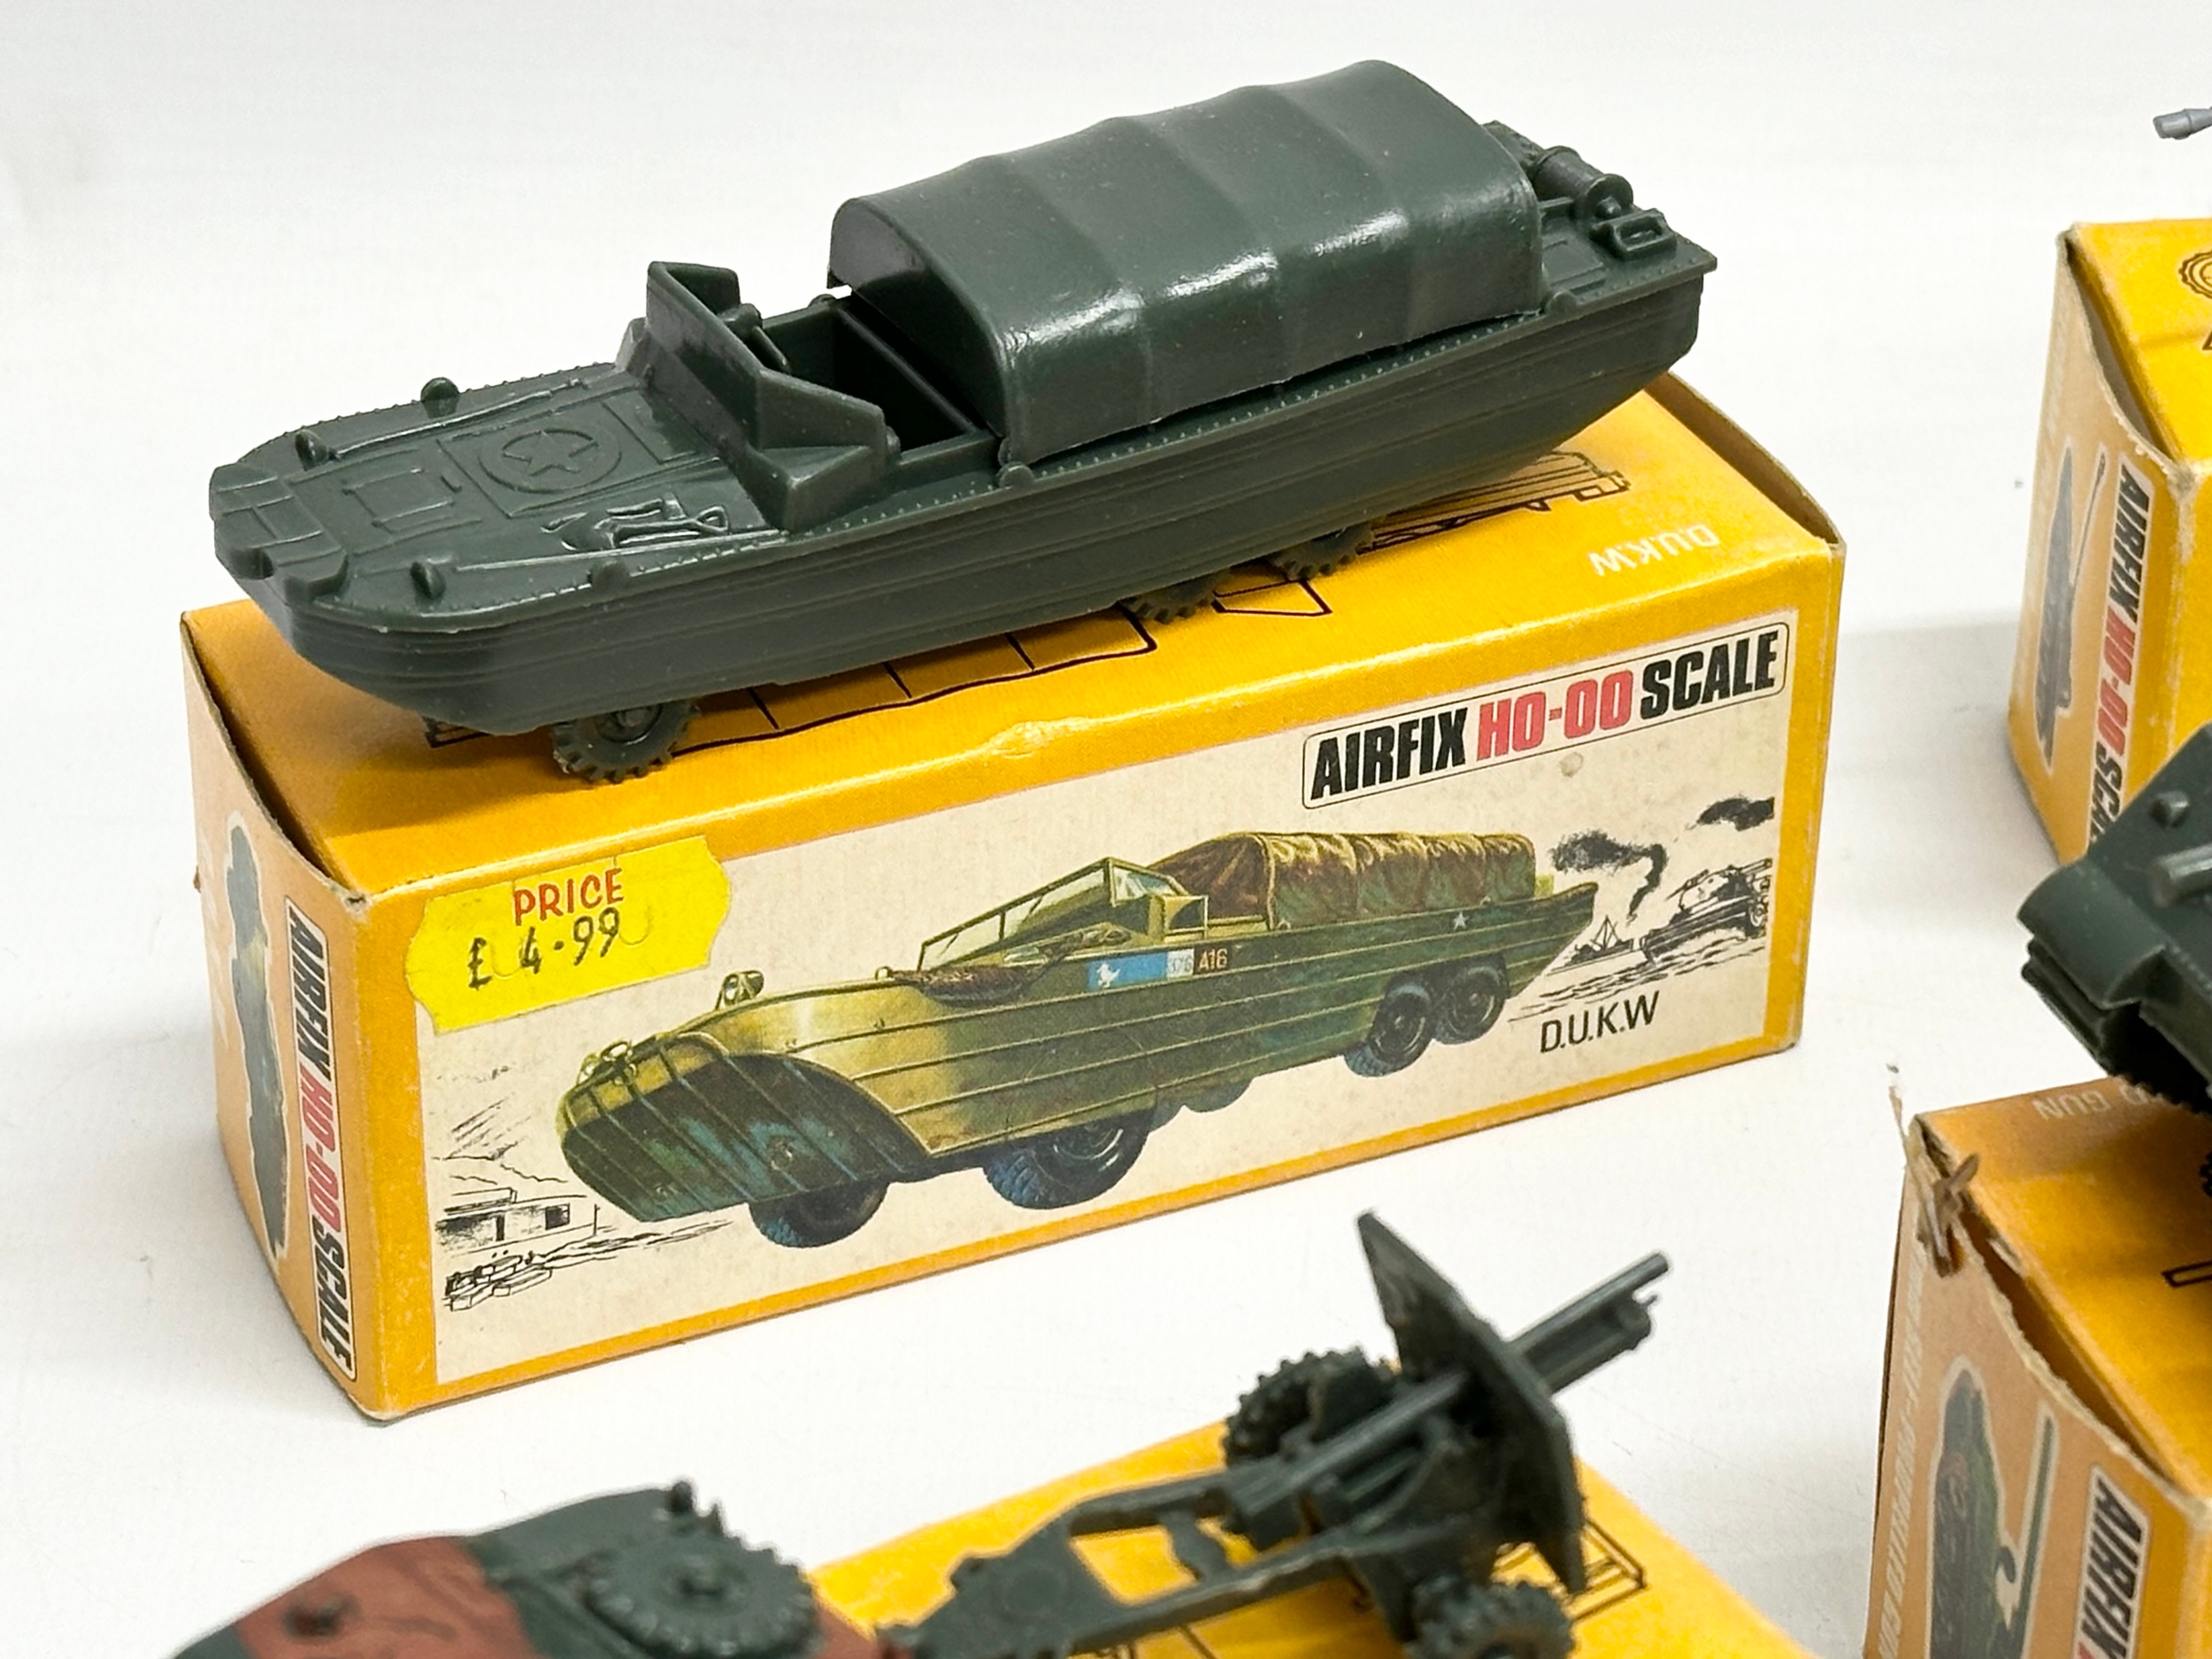 A collection of vintage Airfix HO-OO scale vehicles with boxes and soldiers. - Image 5 of 12